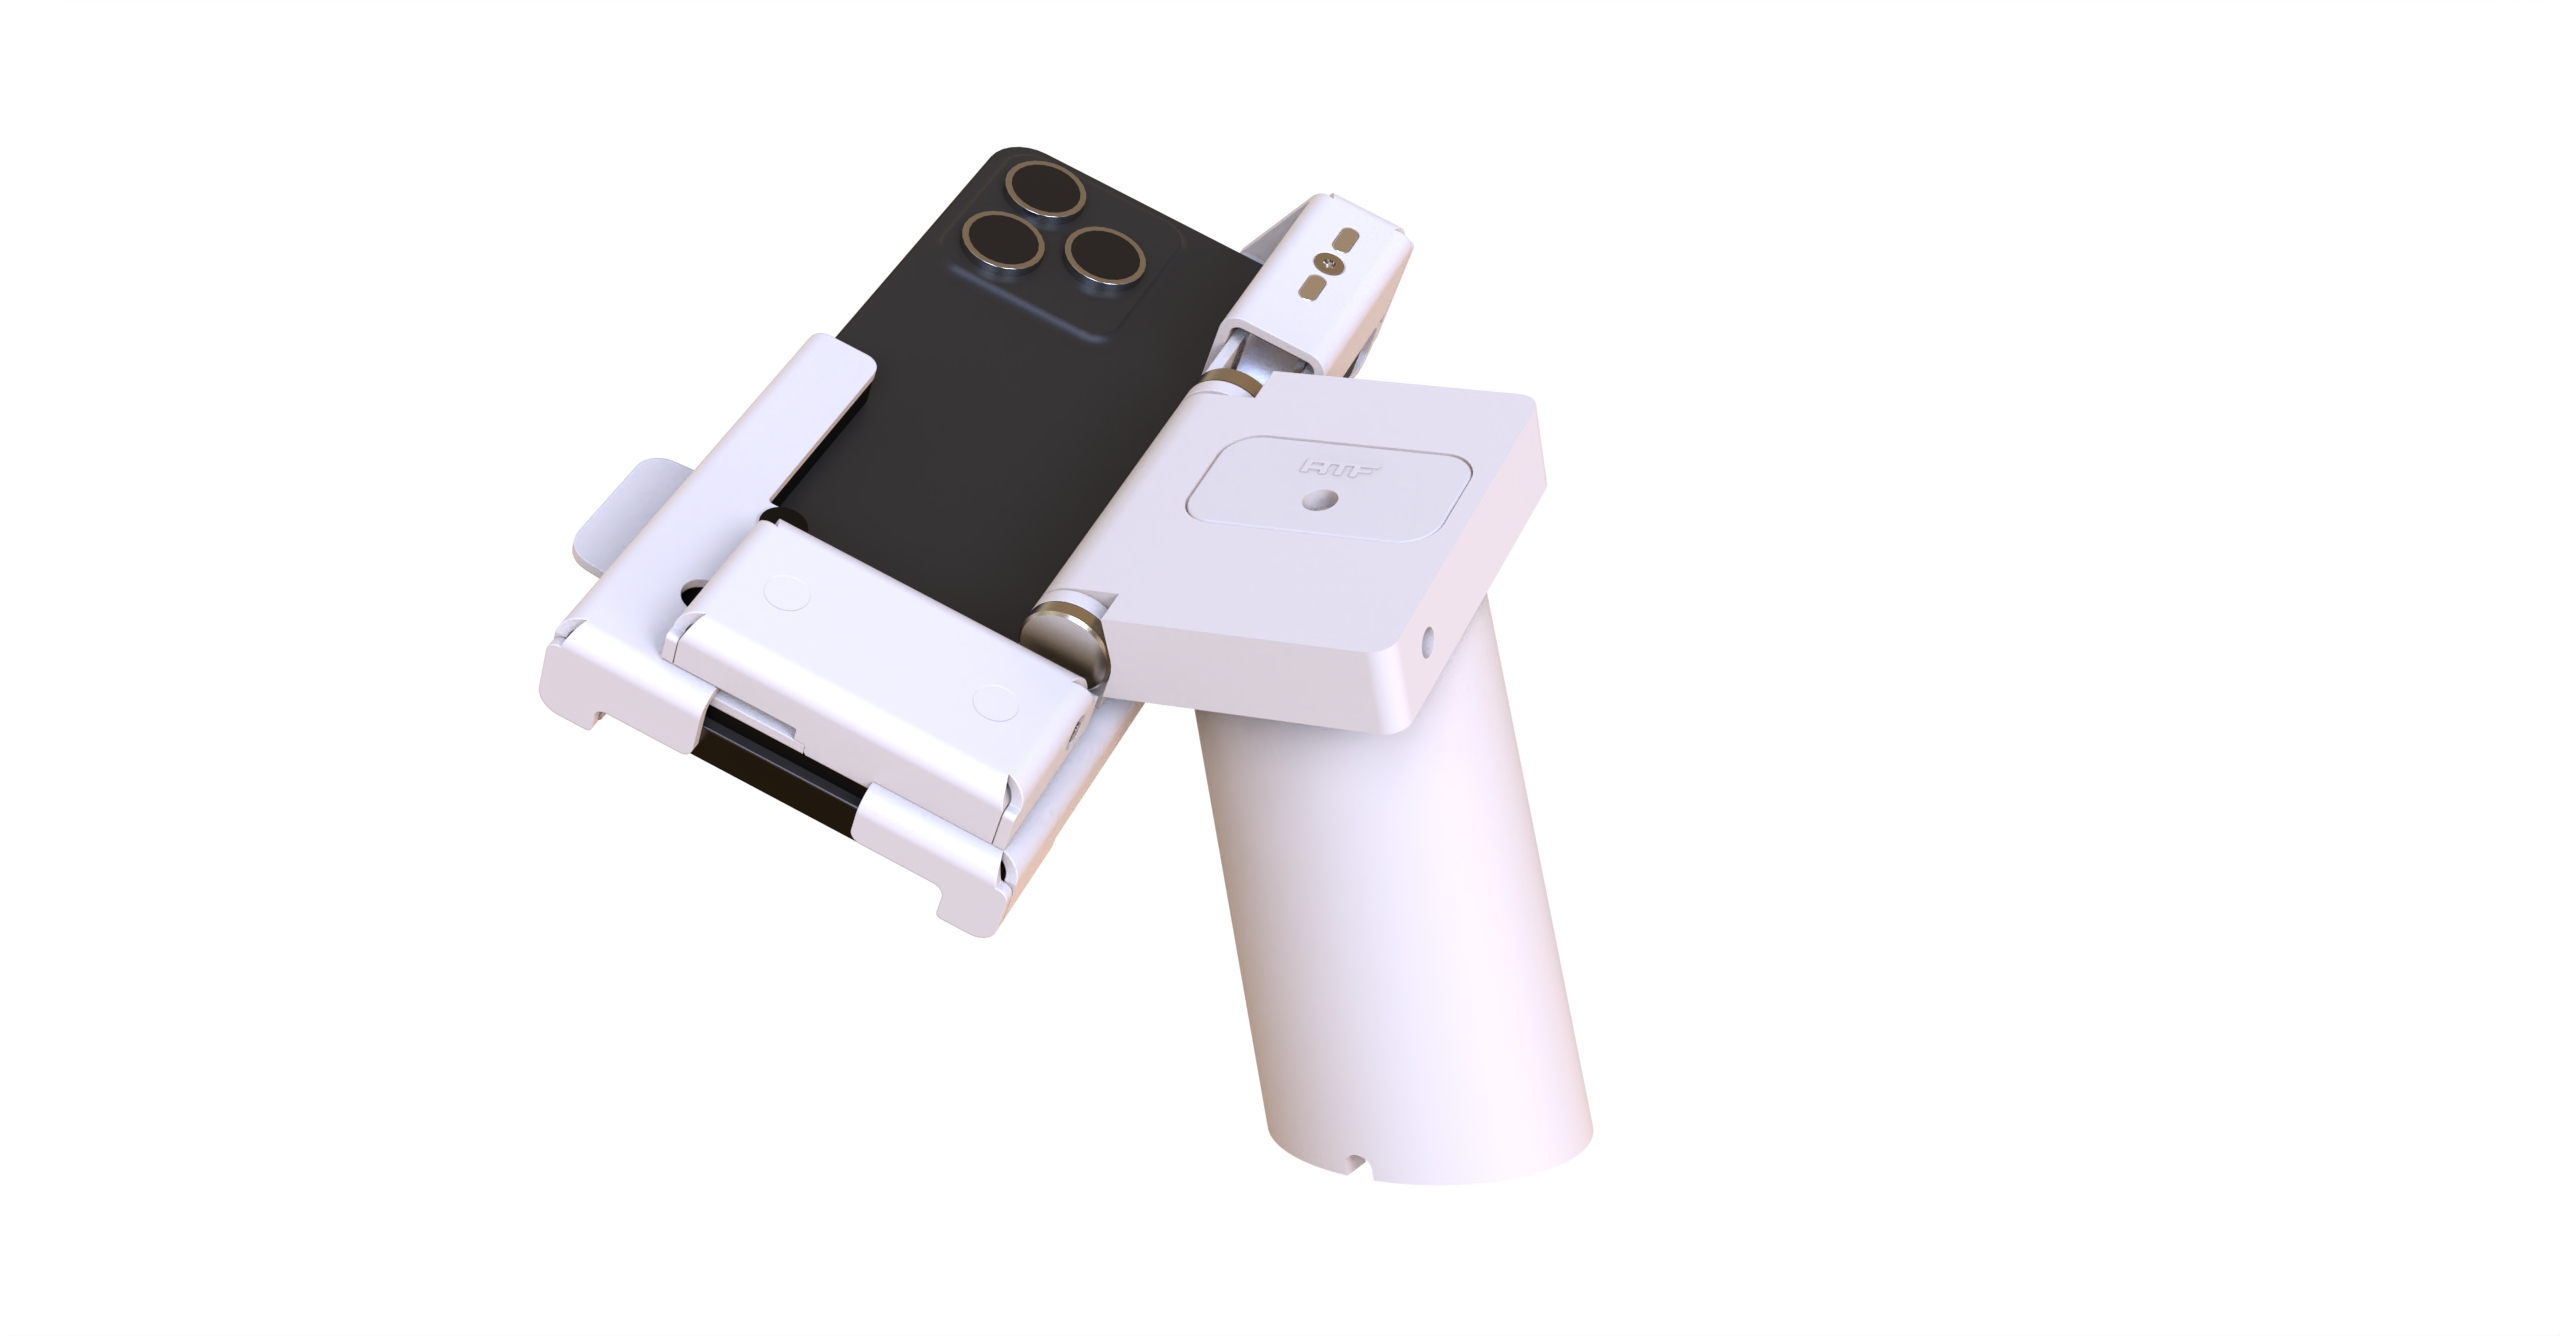 HD Flip device from RTF Global for smartphones